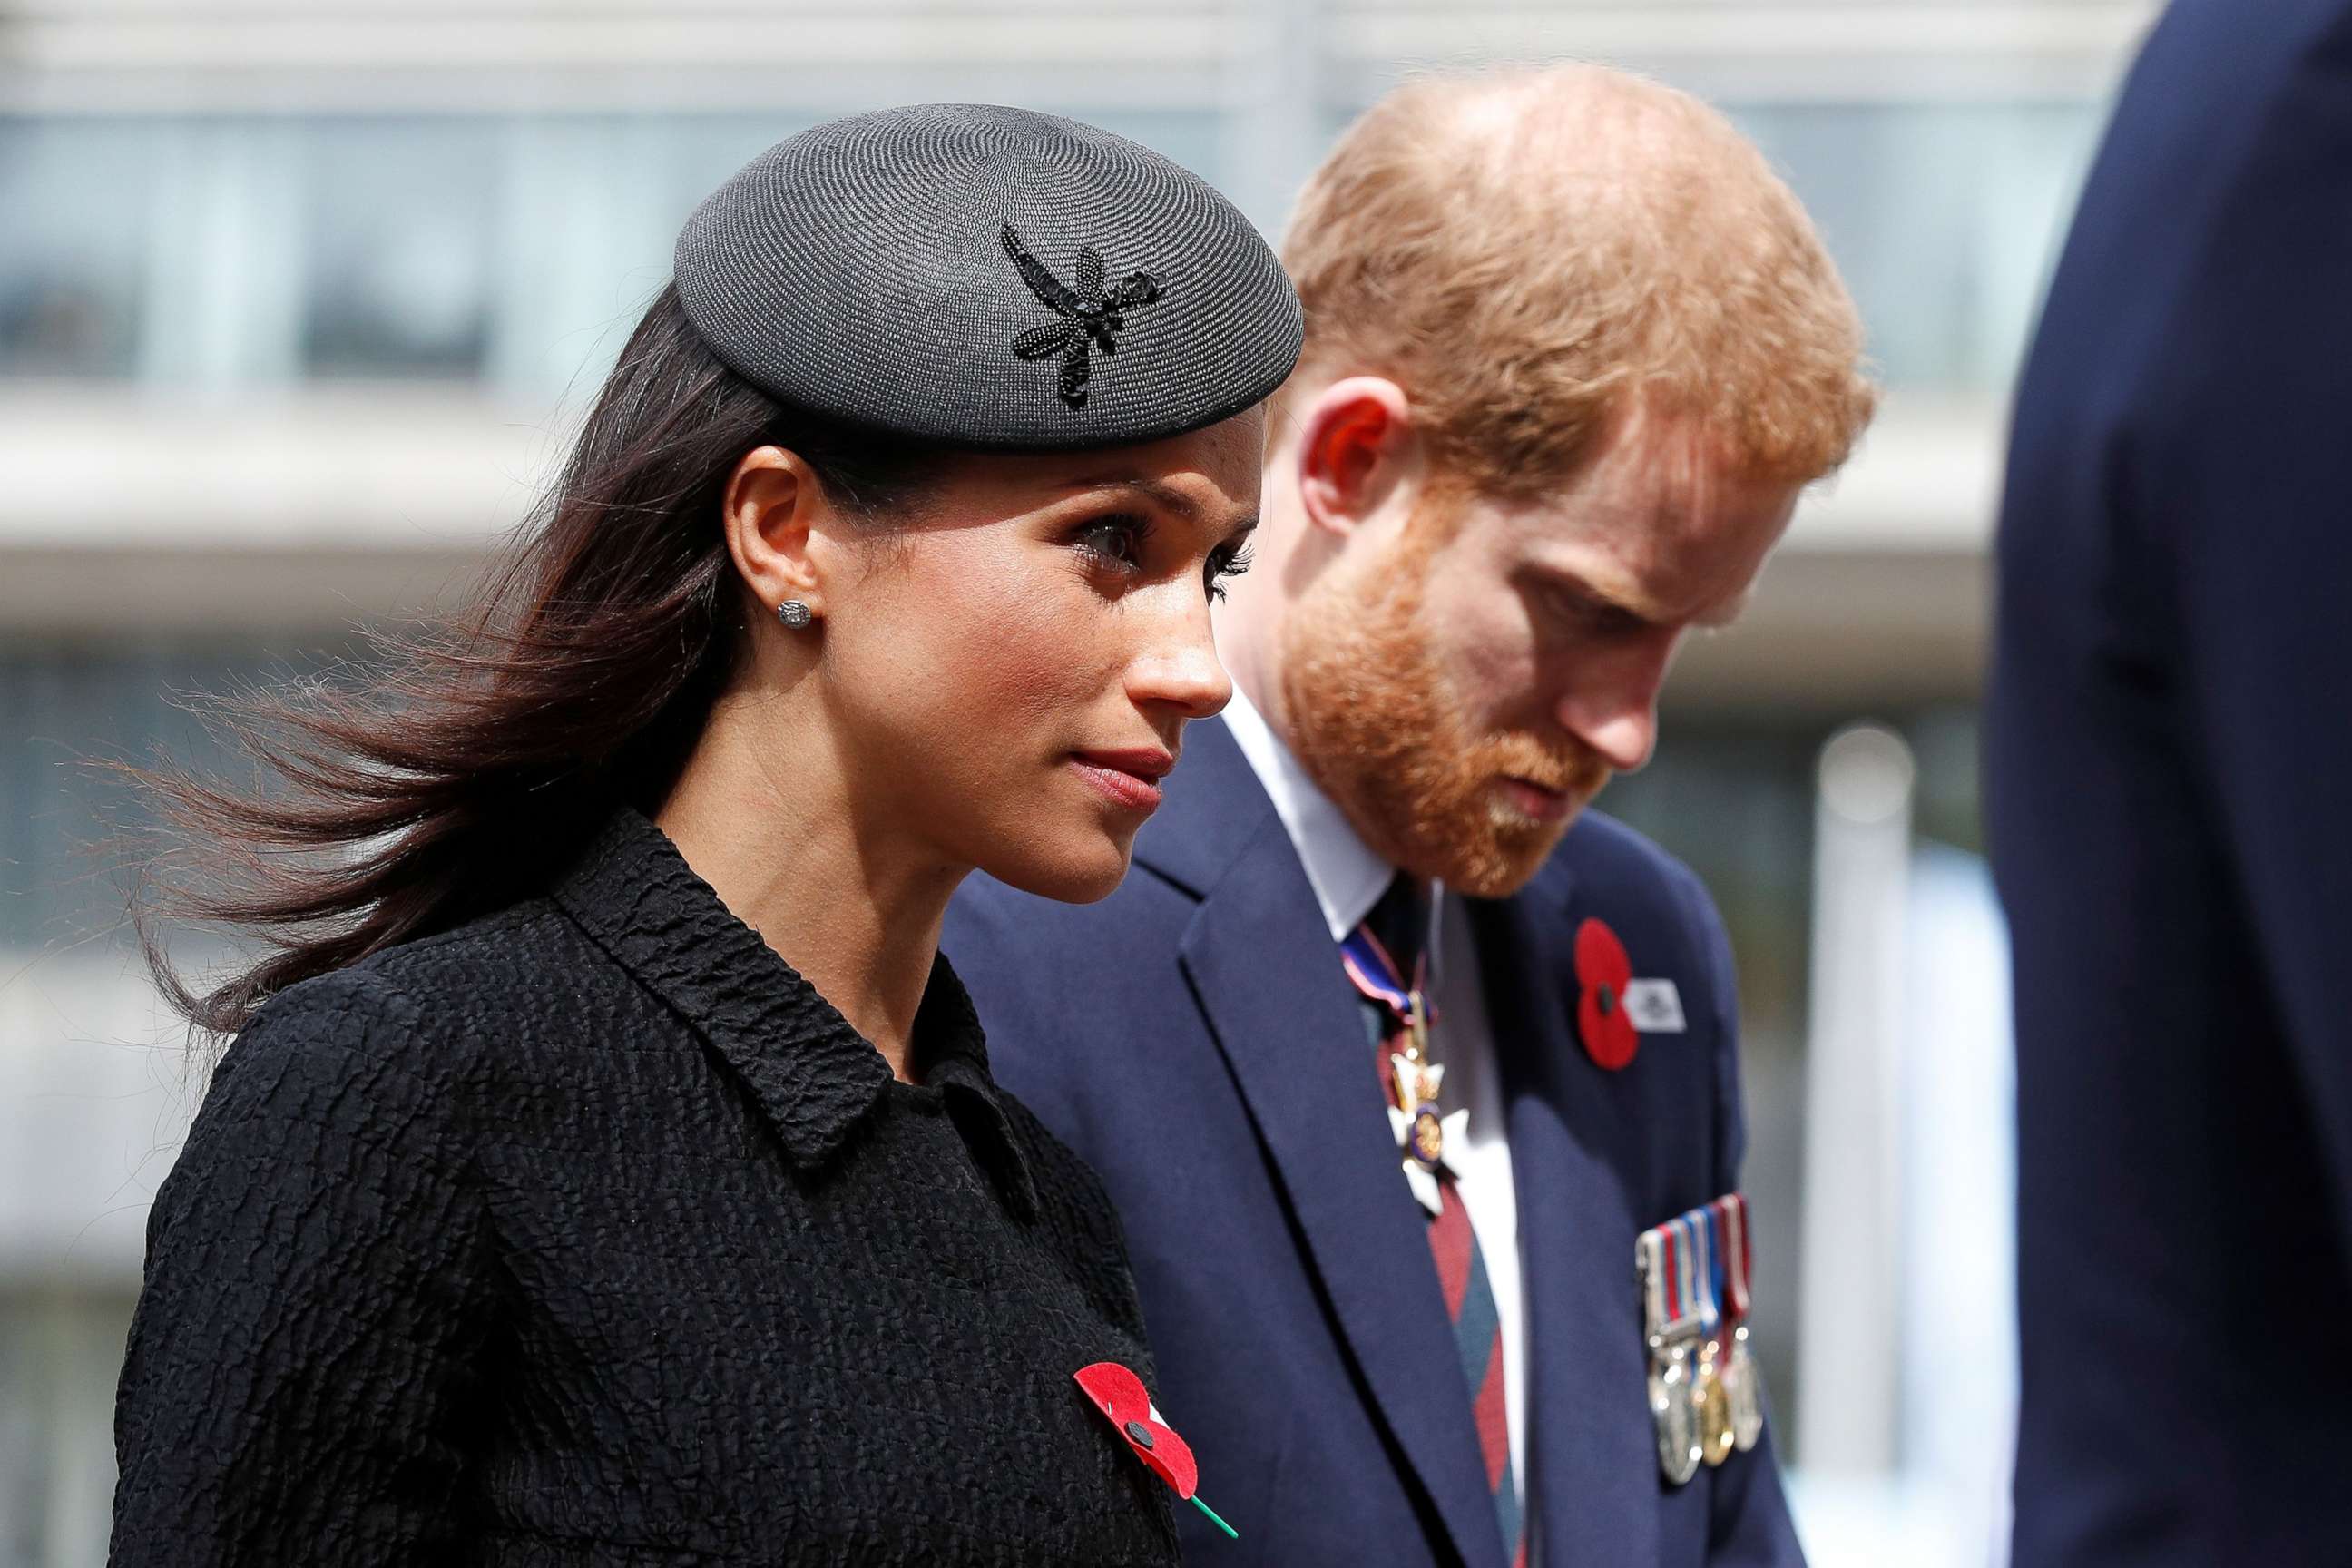 PHOTO: Britain's Prince Harry and his fiancee Meghan Markle arrive to attend a service of commemoration and thanksgiving to mark Anzac Day in Westminster Abbey in London on April 25, 2018.